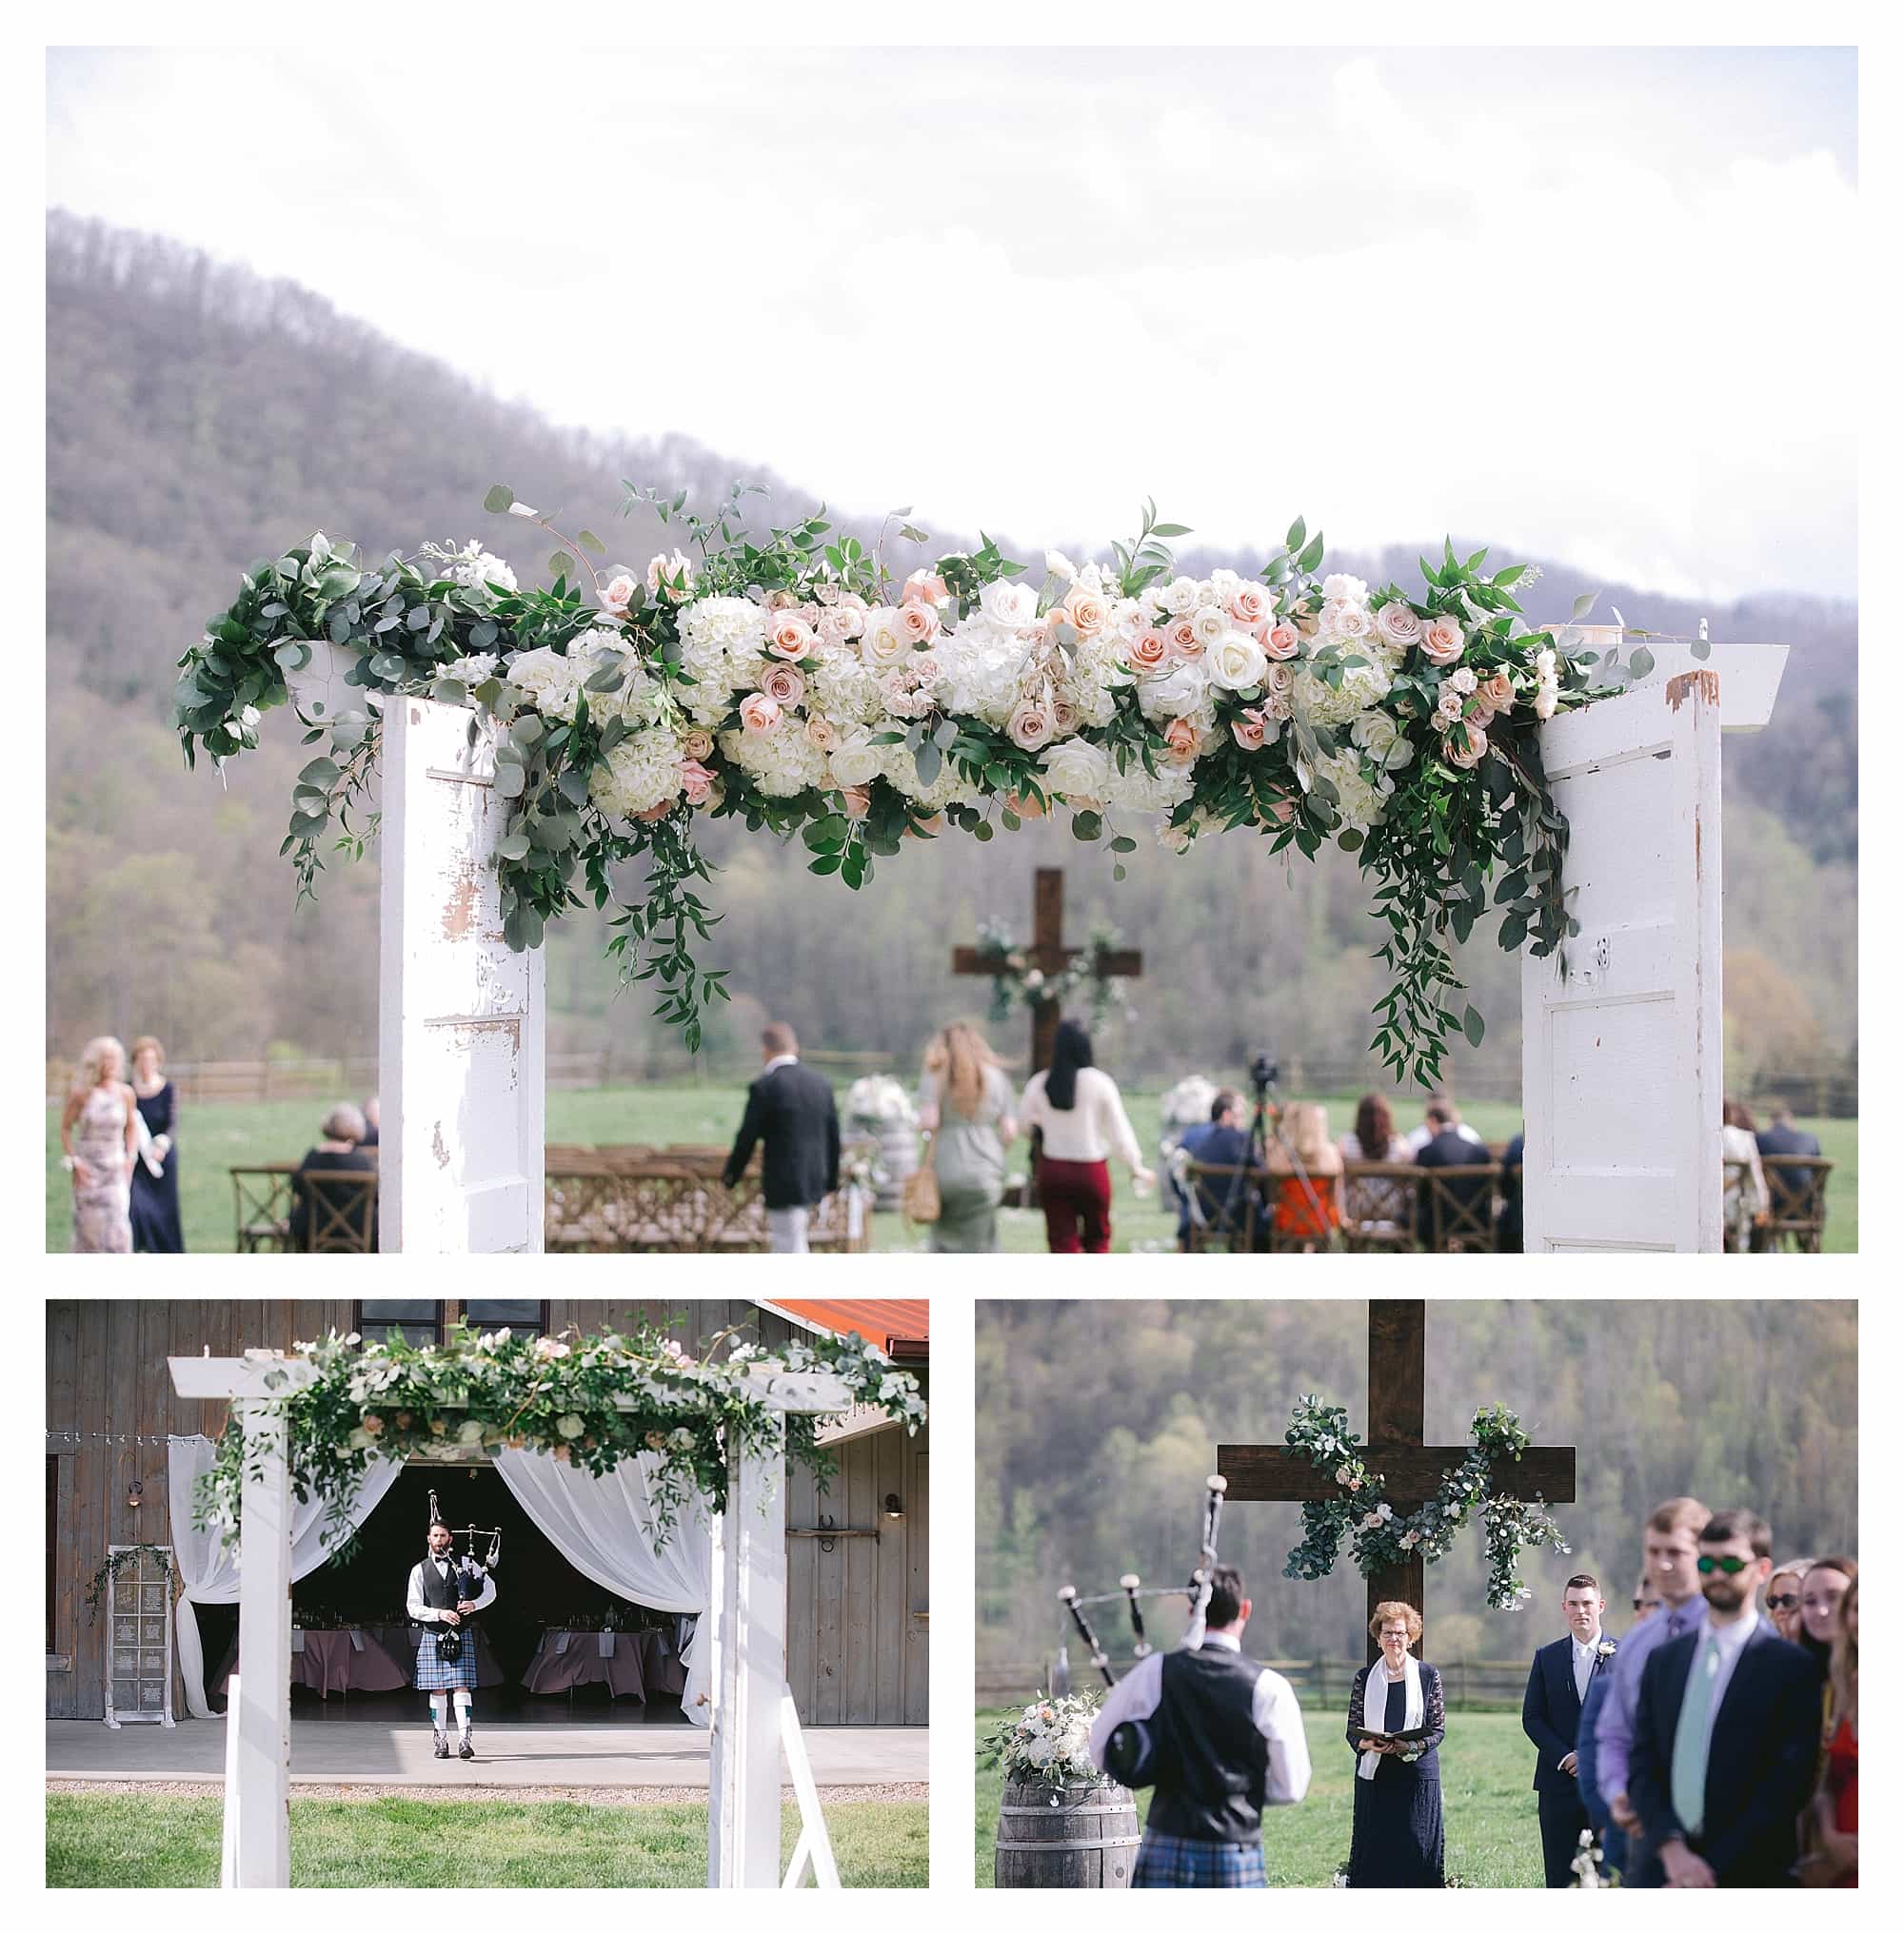 Wedding ceremony decor - wedding arbour made with two old doors and cream and peach flowers across the top